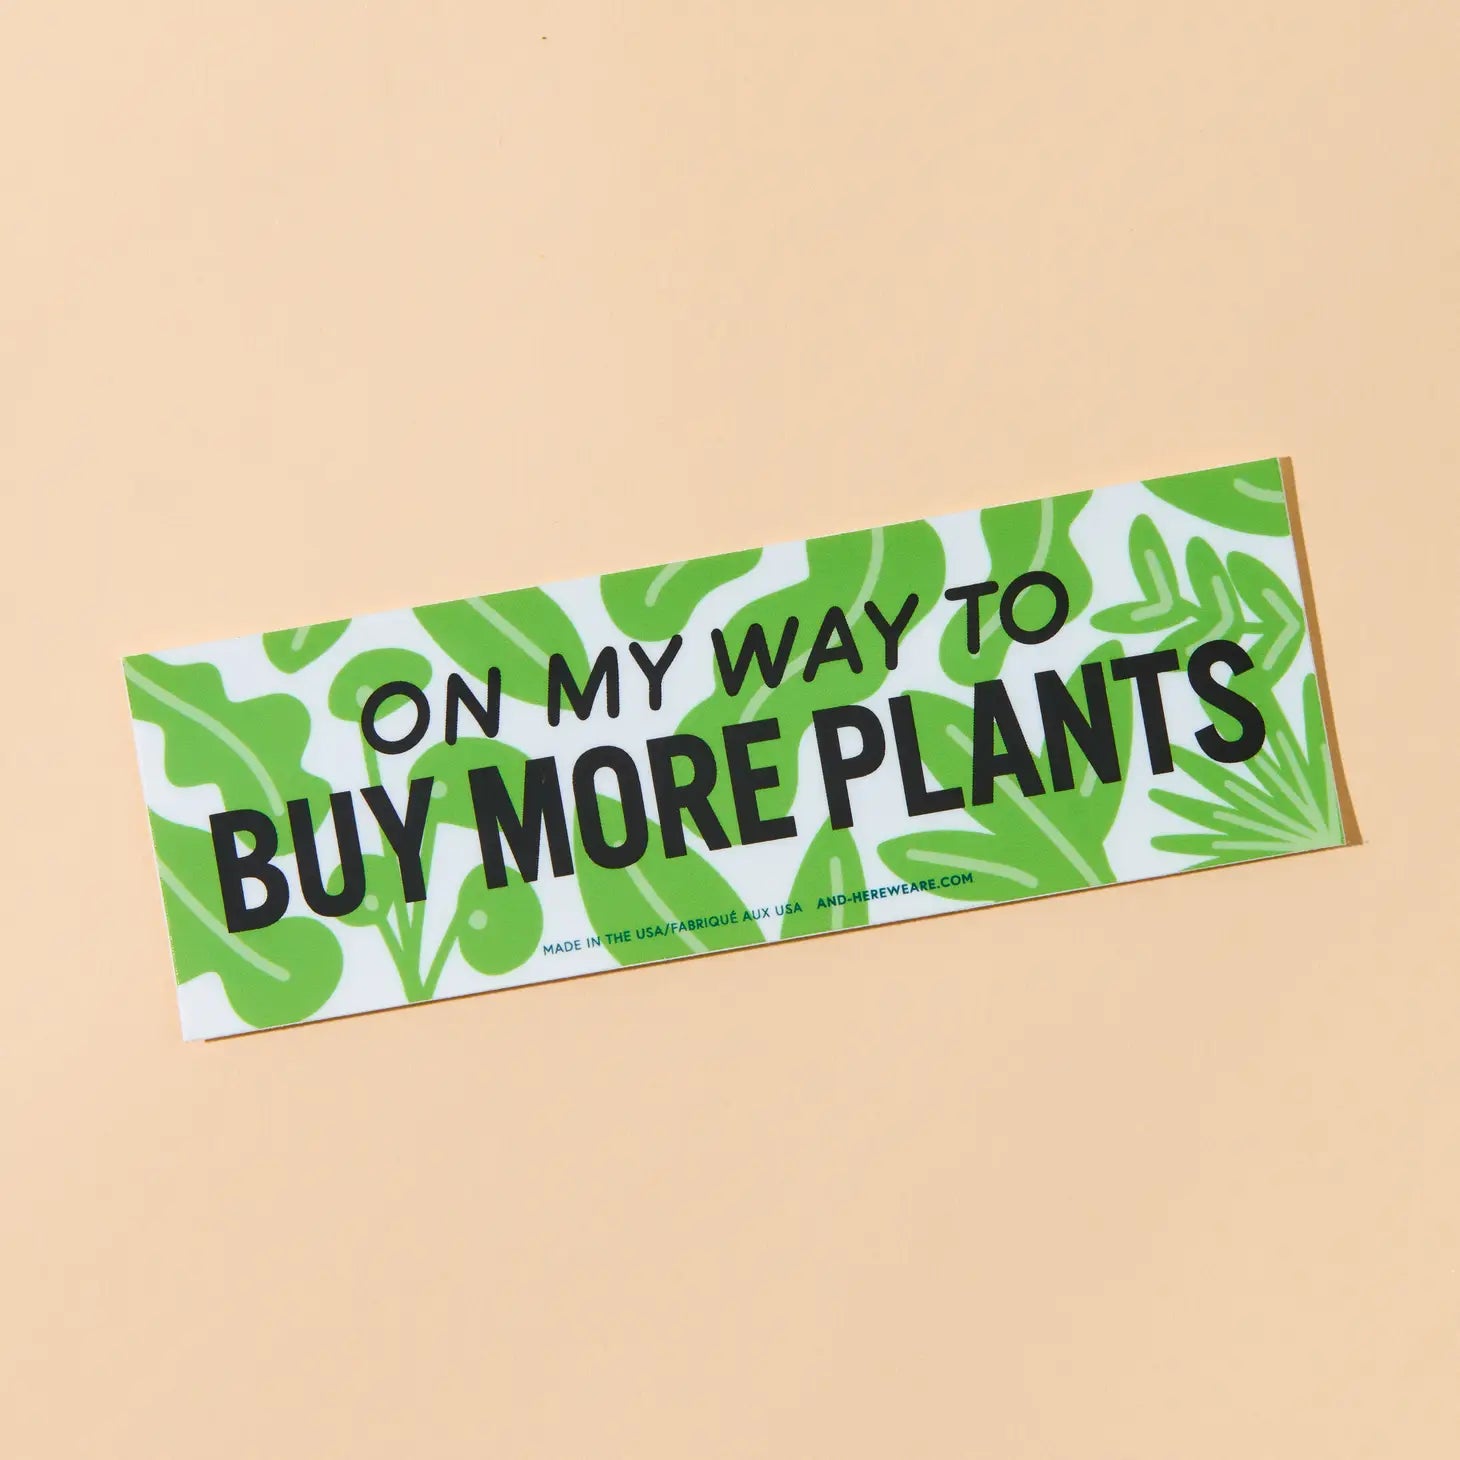 On My Way To Buy More Plants Bumper Sticker